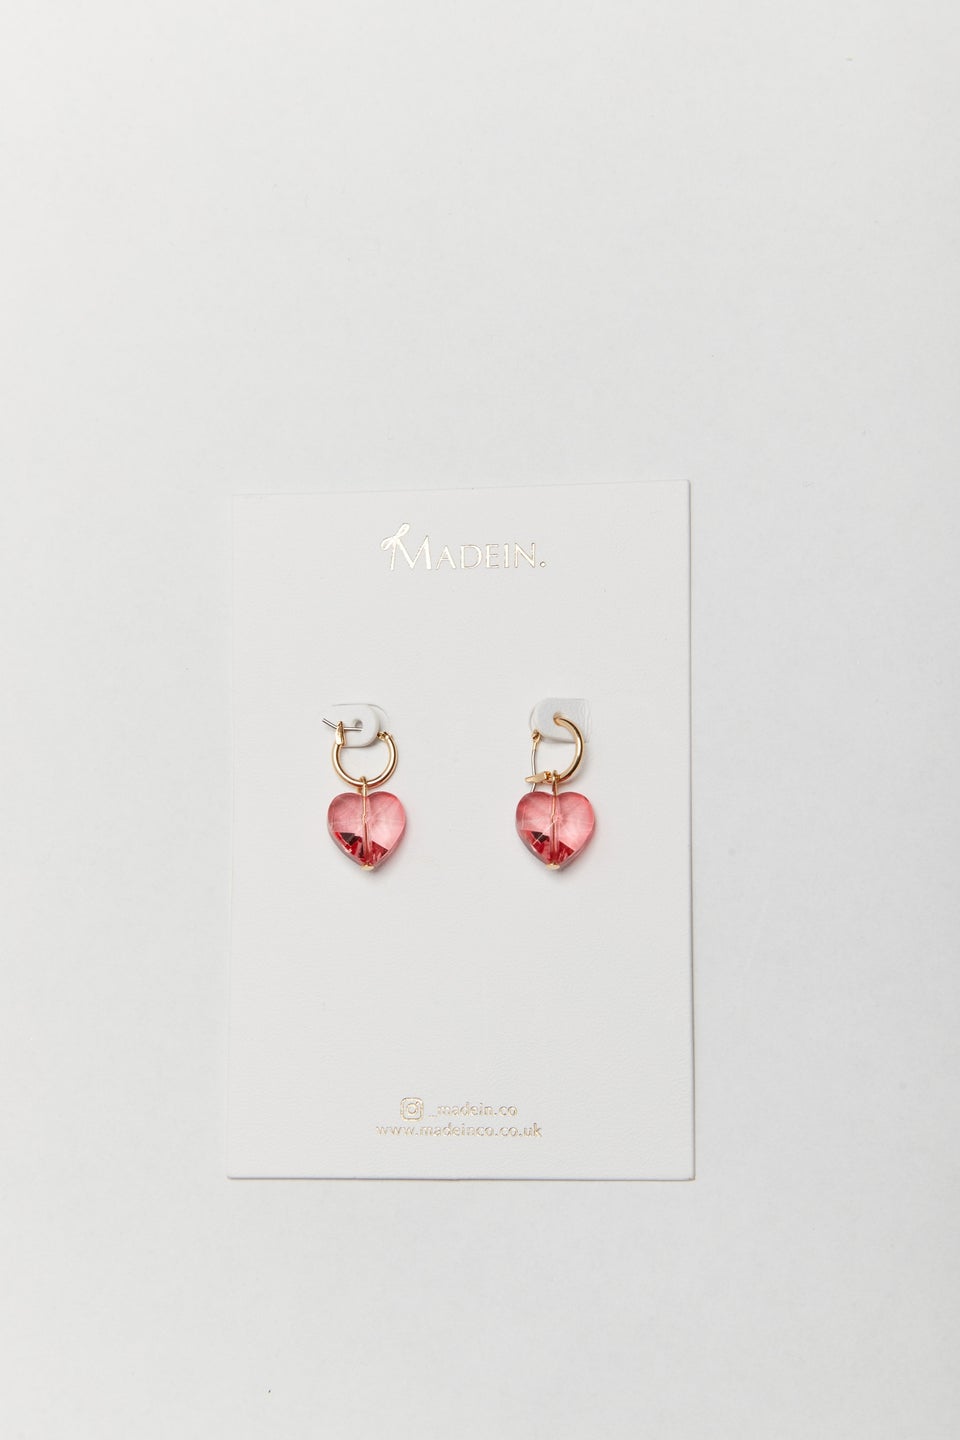 Madein Gold and Red Heart Jewel Earrings